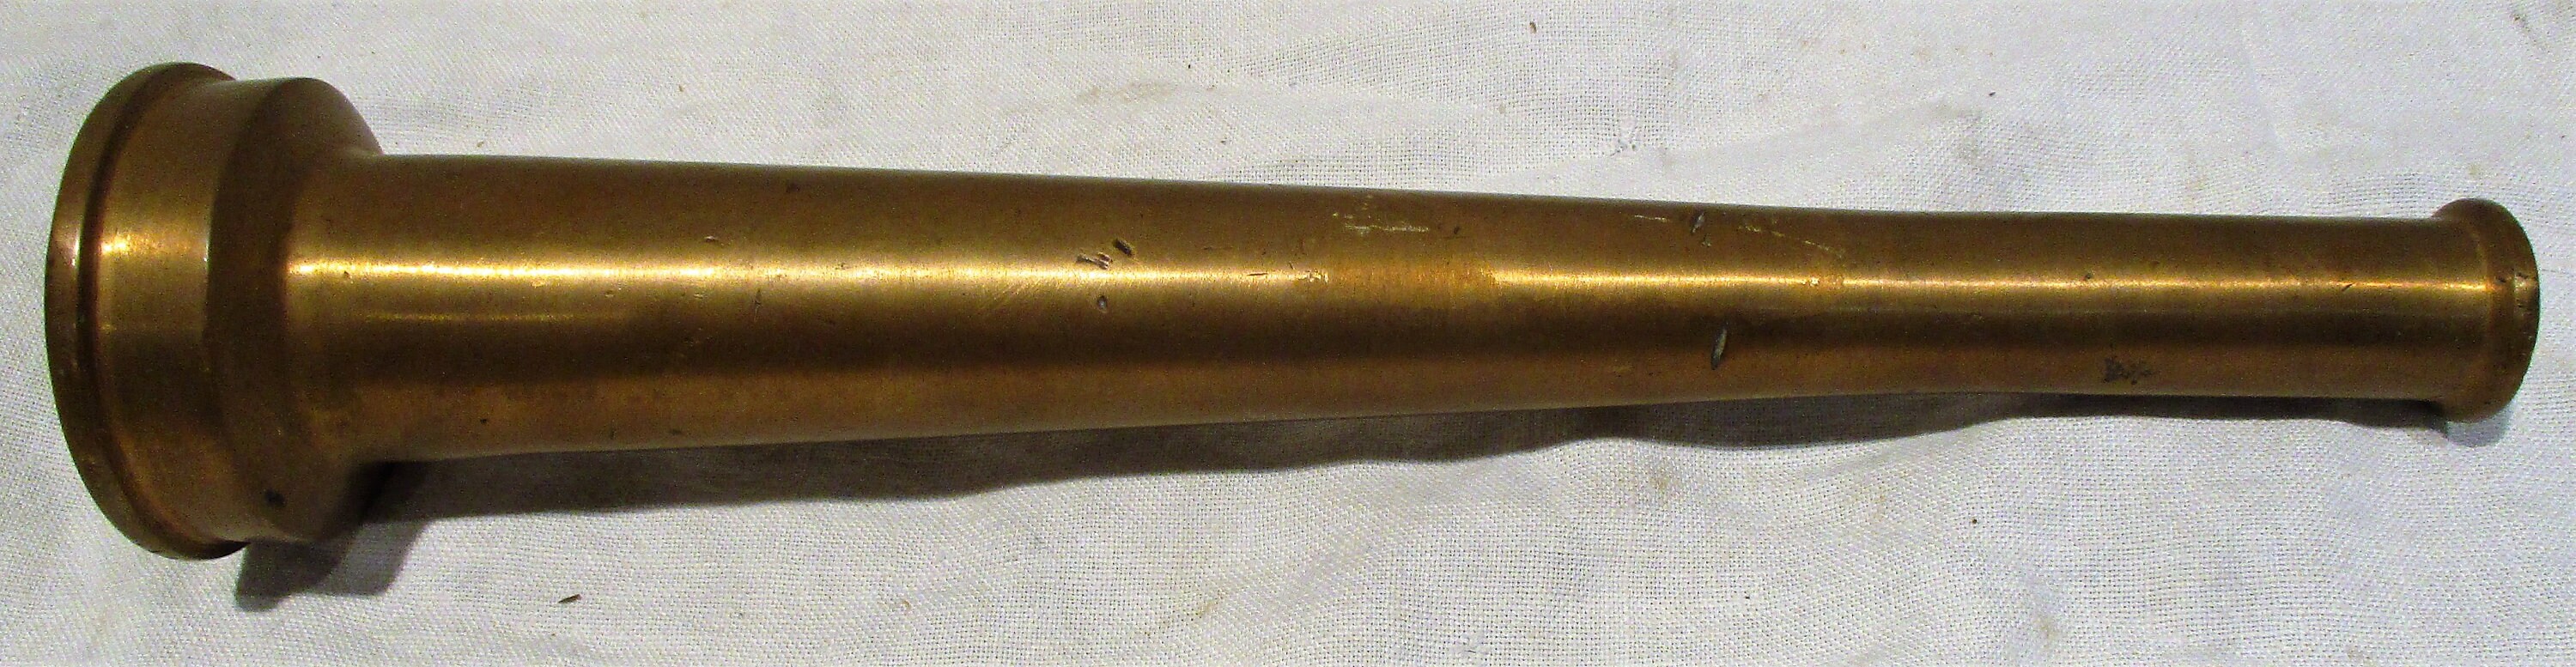 Large Brass Fire Hose Nozzle, Vintage Firefighting Equipment Salvage 